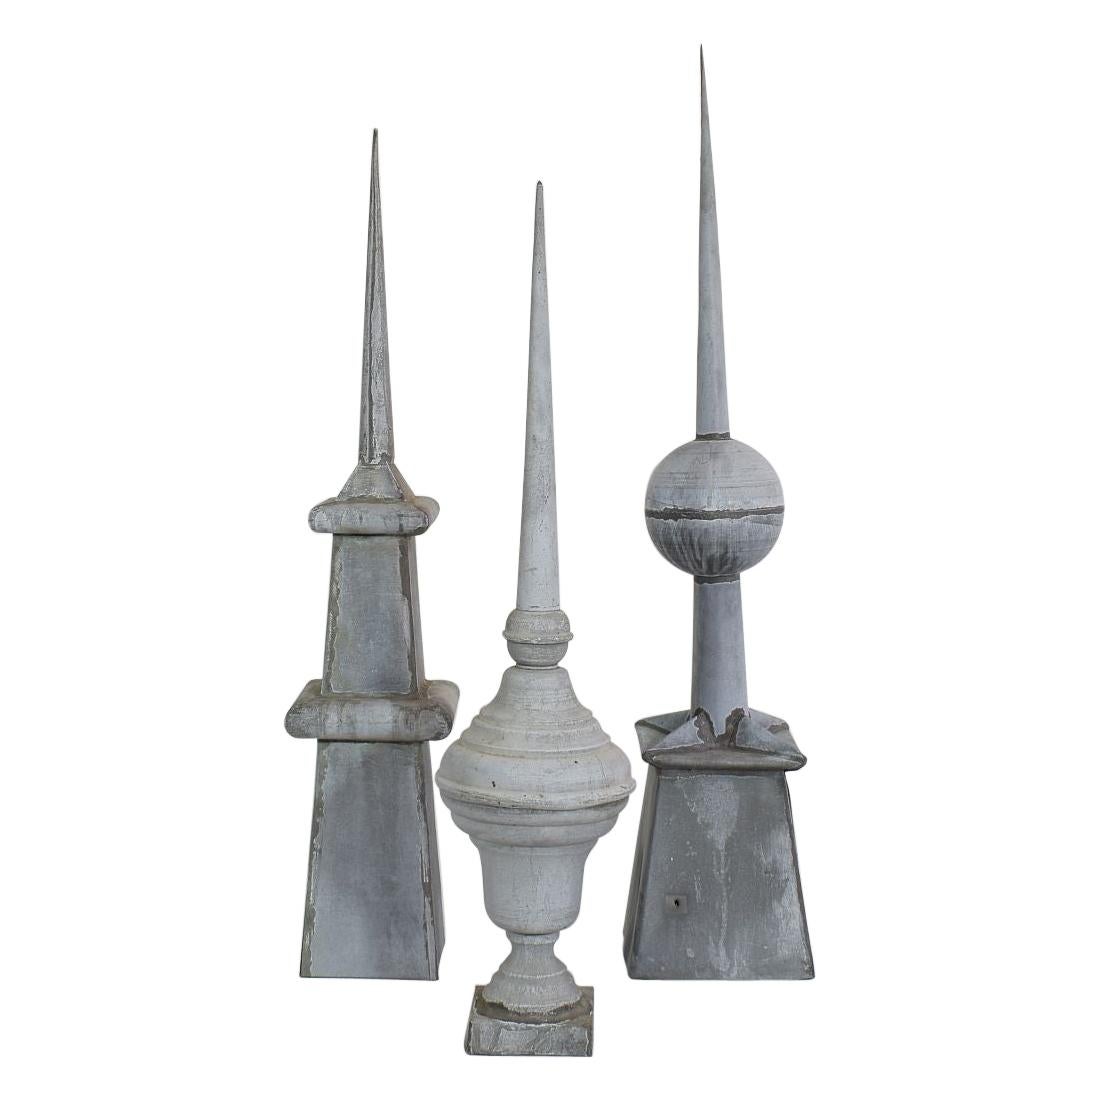 Collection of 3 French 19th Century Zinc Roof Finials